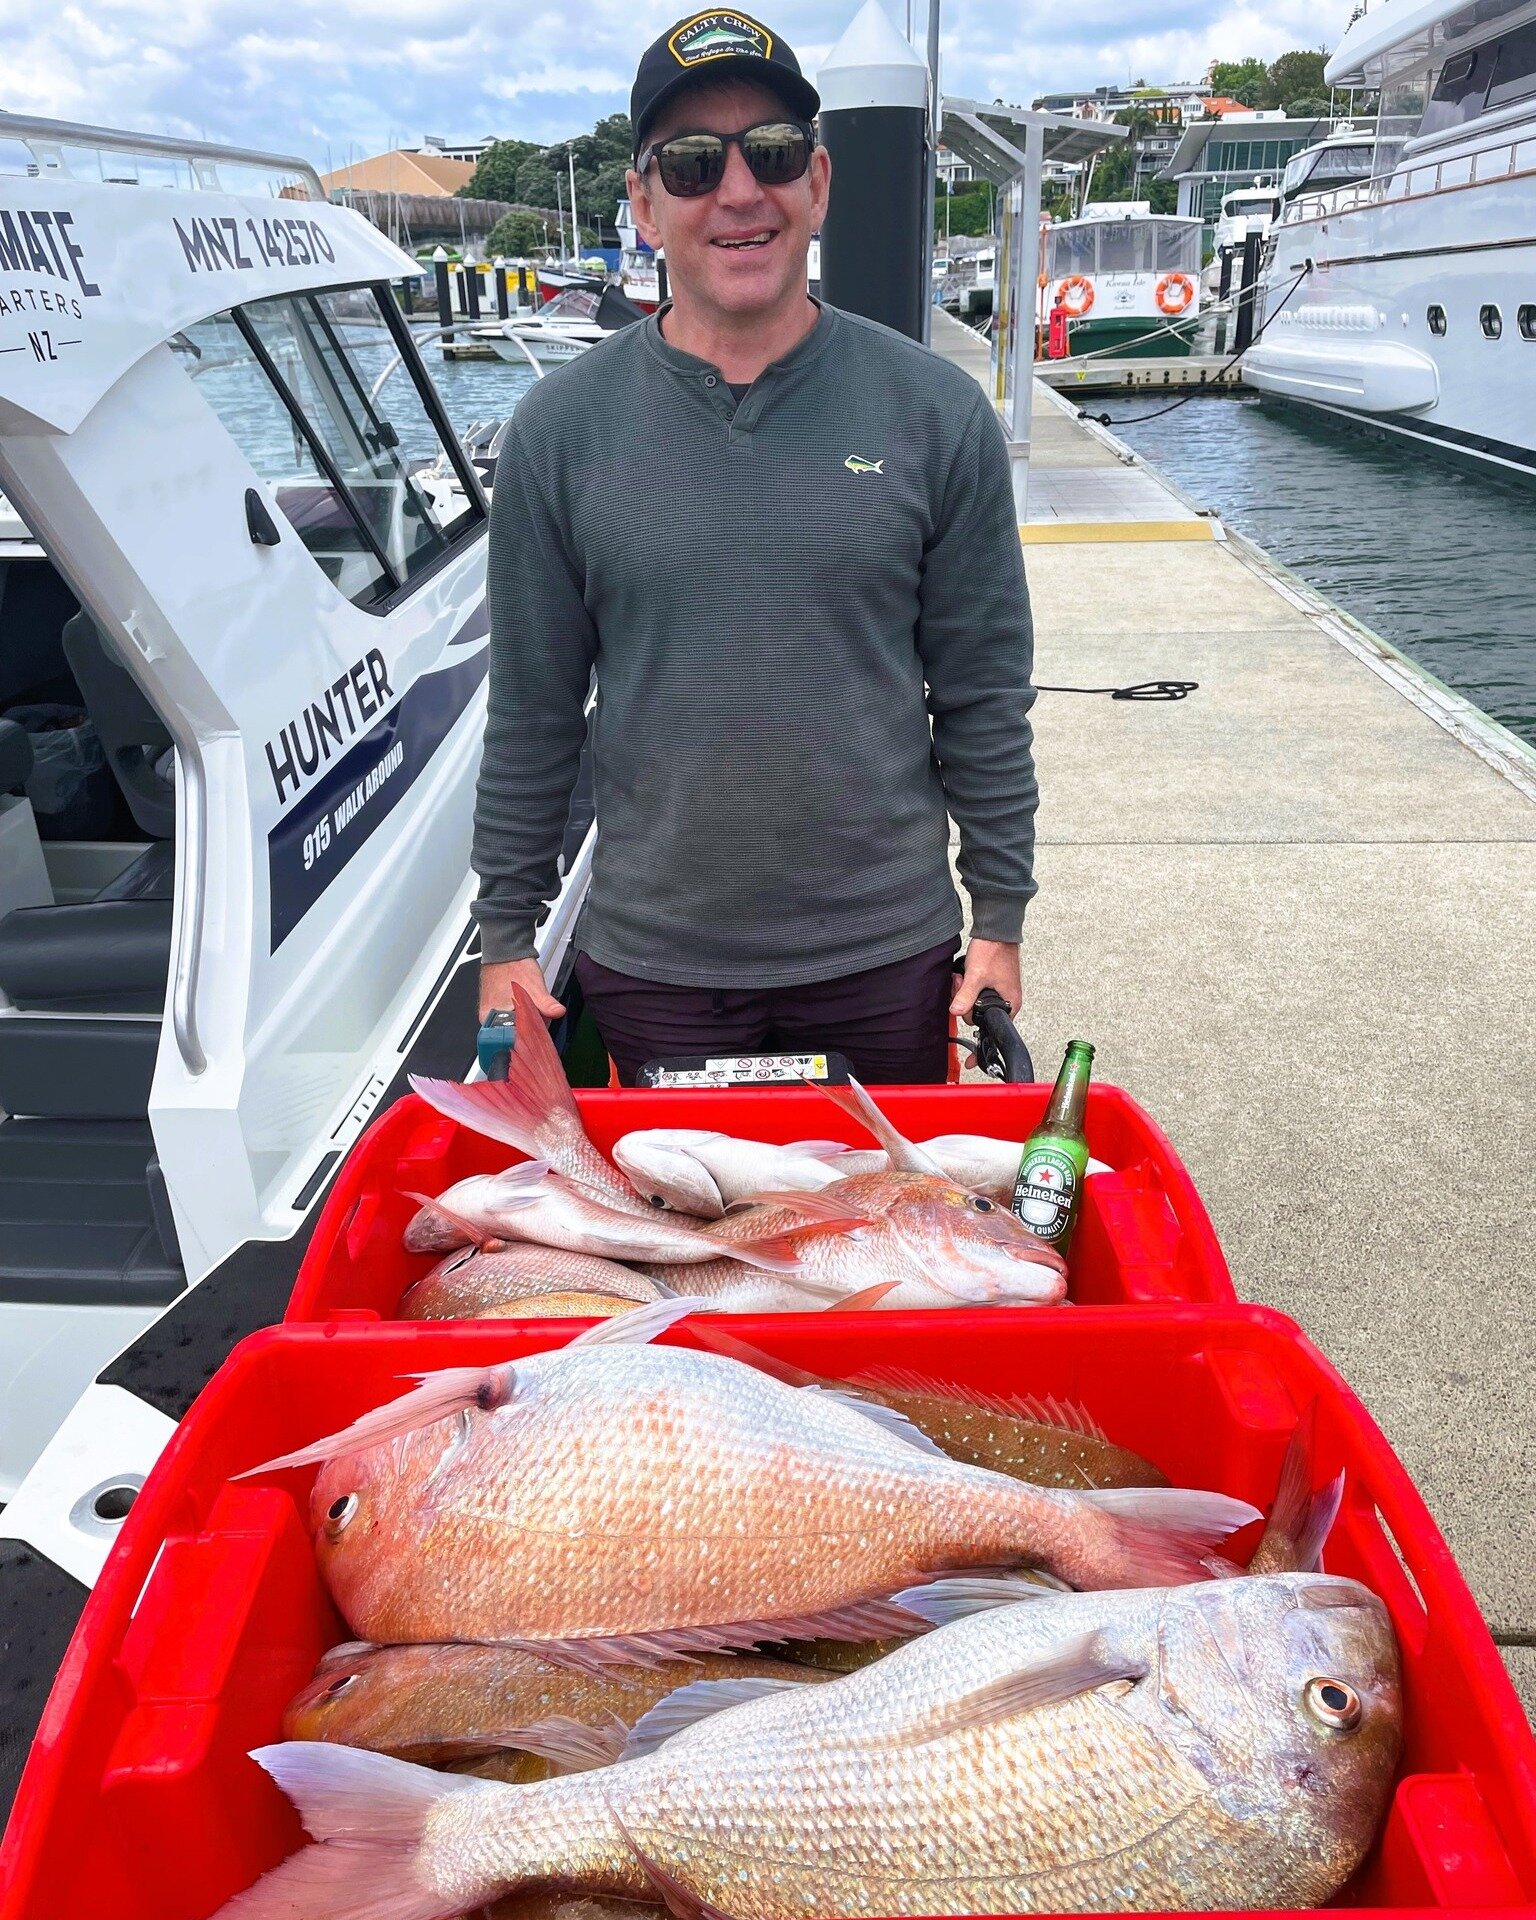 What better way to wrap a great day on the water than to pass over your catch for filleting to the good people @the_kai_ika_project (while you head over to swashies for some cold fizz).

Kai Ika's service is exceptional and beyond making light work o